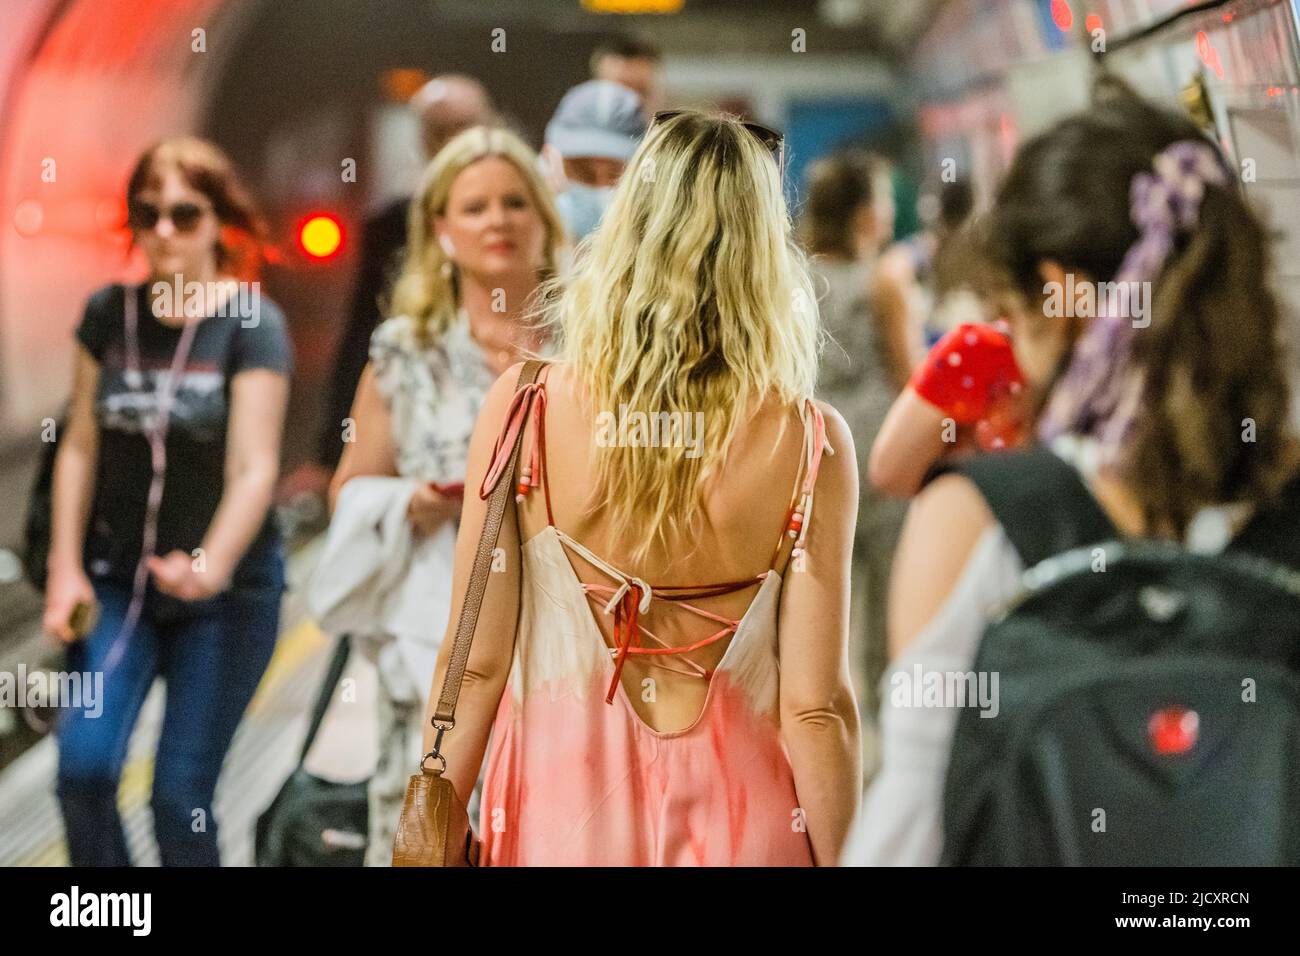 London, UK. 16th June, 2022. Summer dresses, sunhats and shorts - The heatwave weather makes life on the tube uncomfortable. Credit: Guy Bell/Alamy Live News Stock Photo